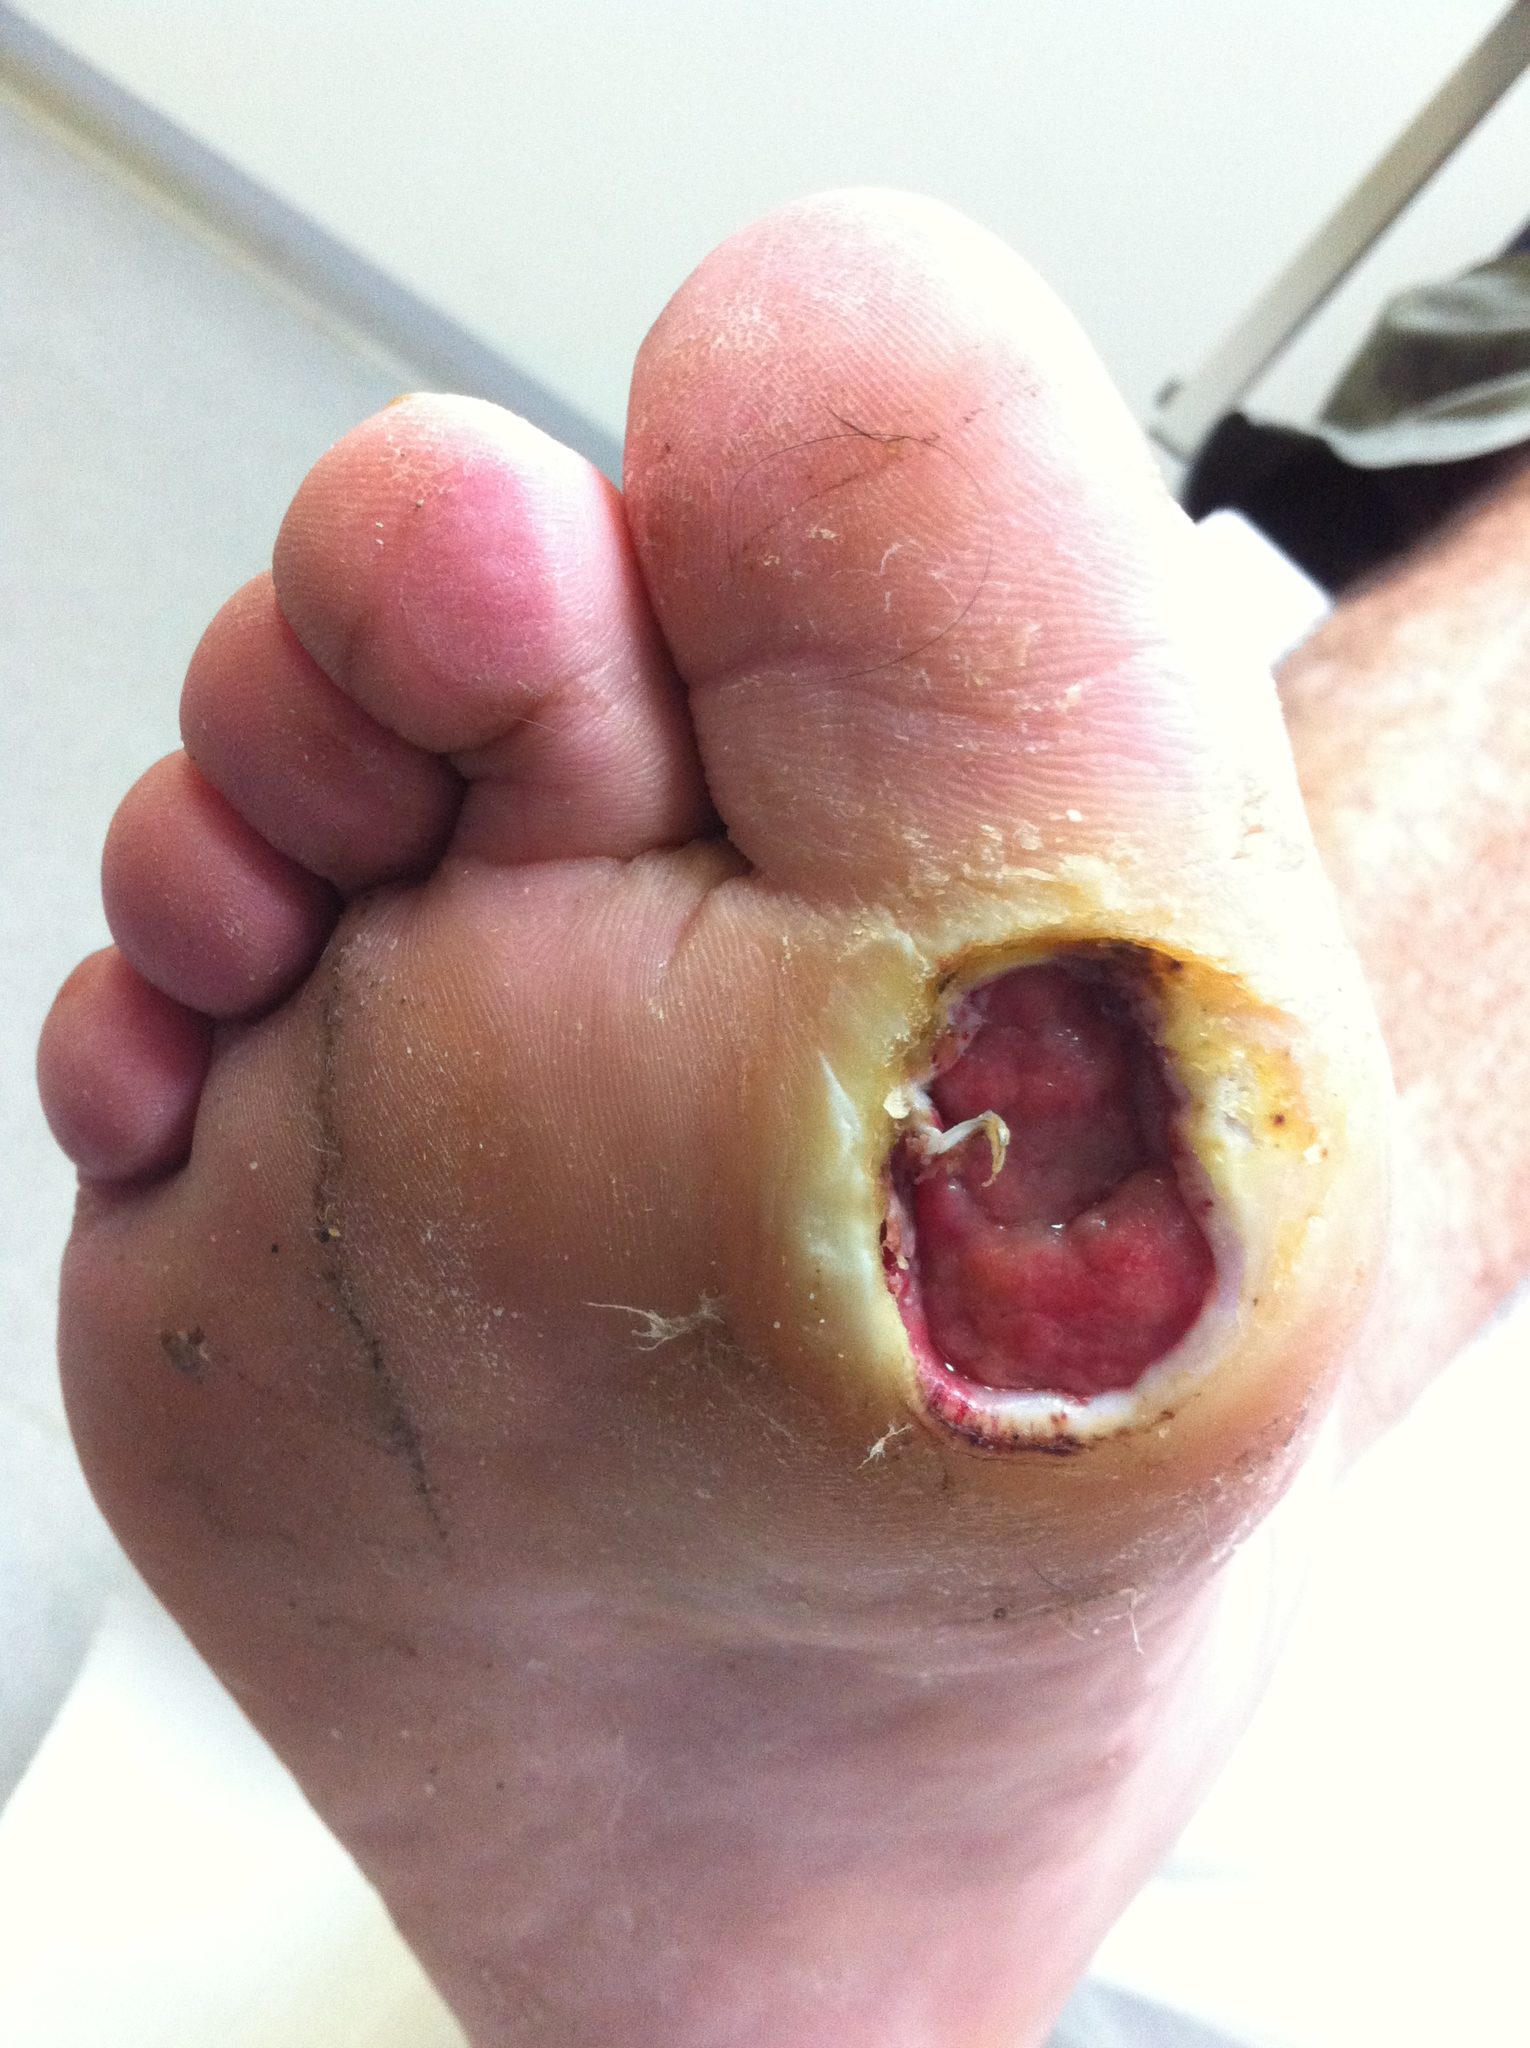 # Diabetic Foot Ulcer Pictures - Diabetes Causes Kidney ...